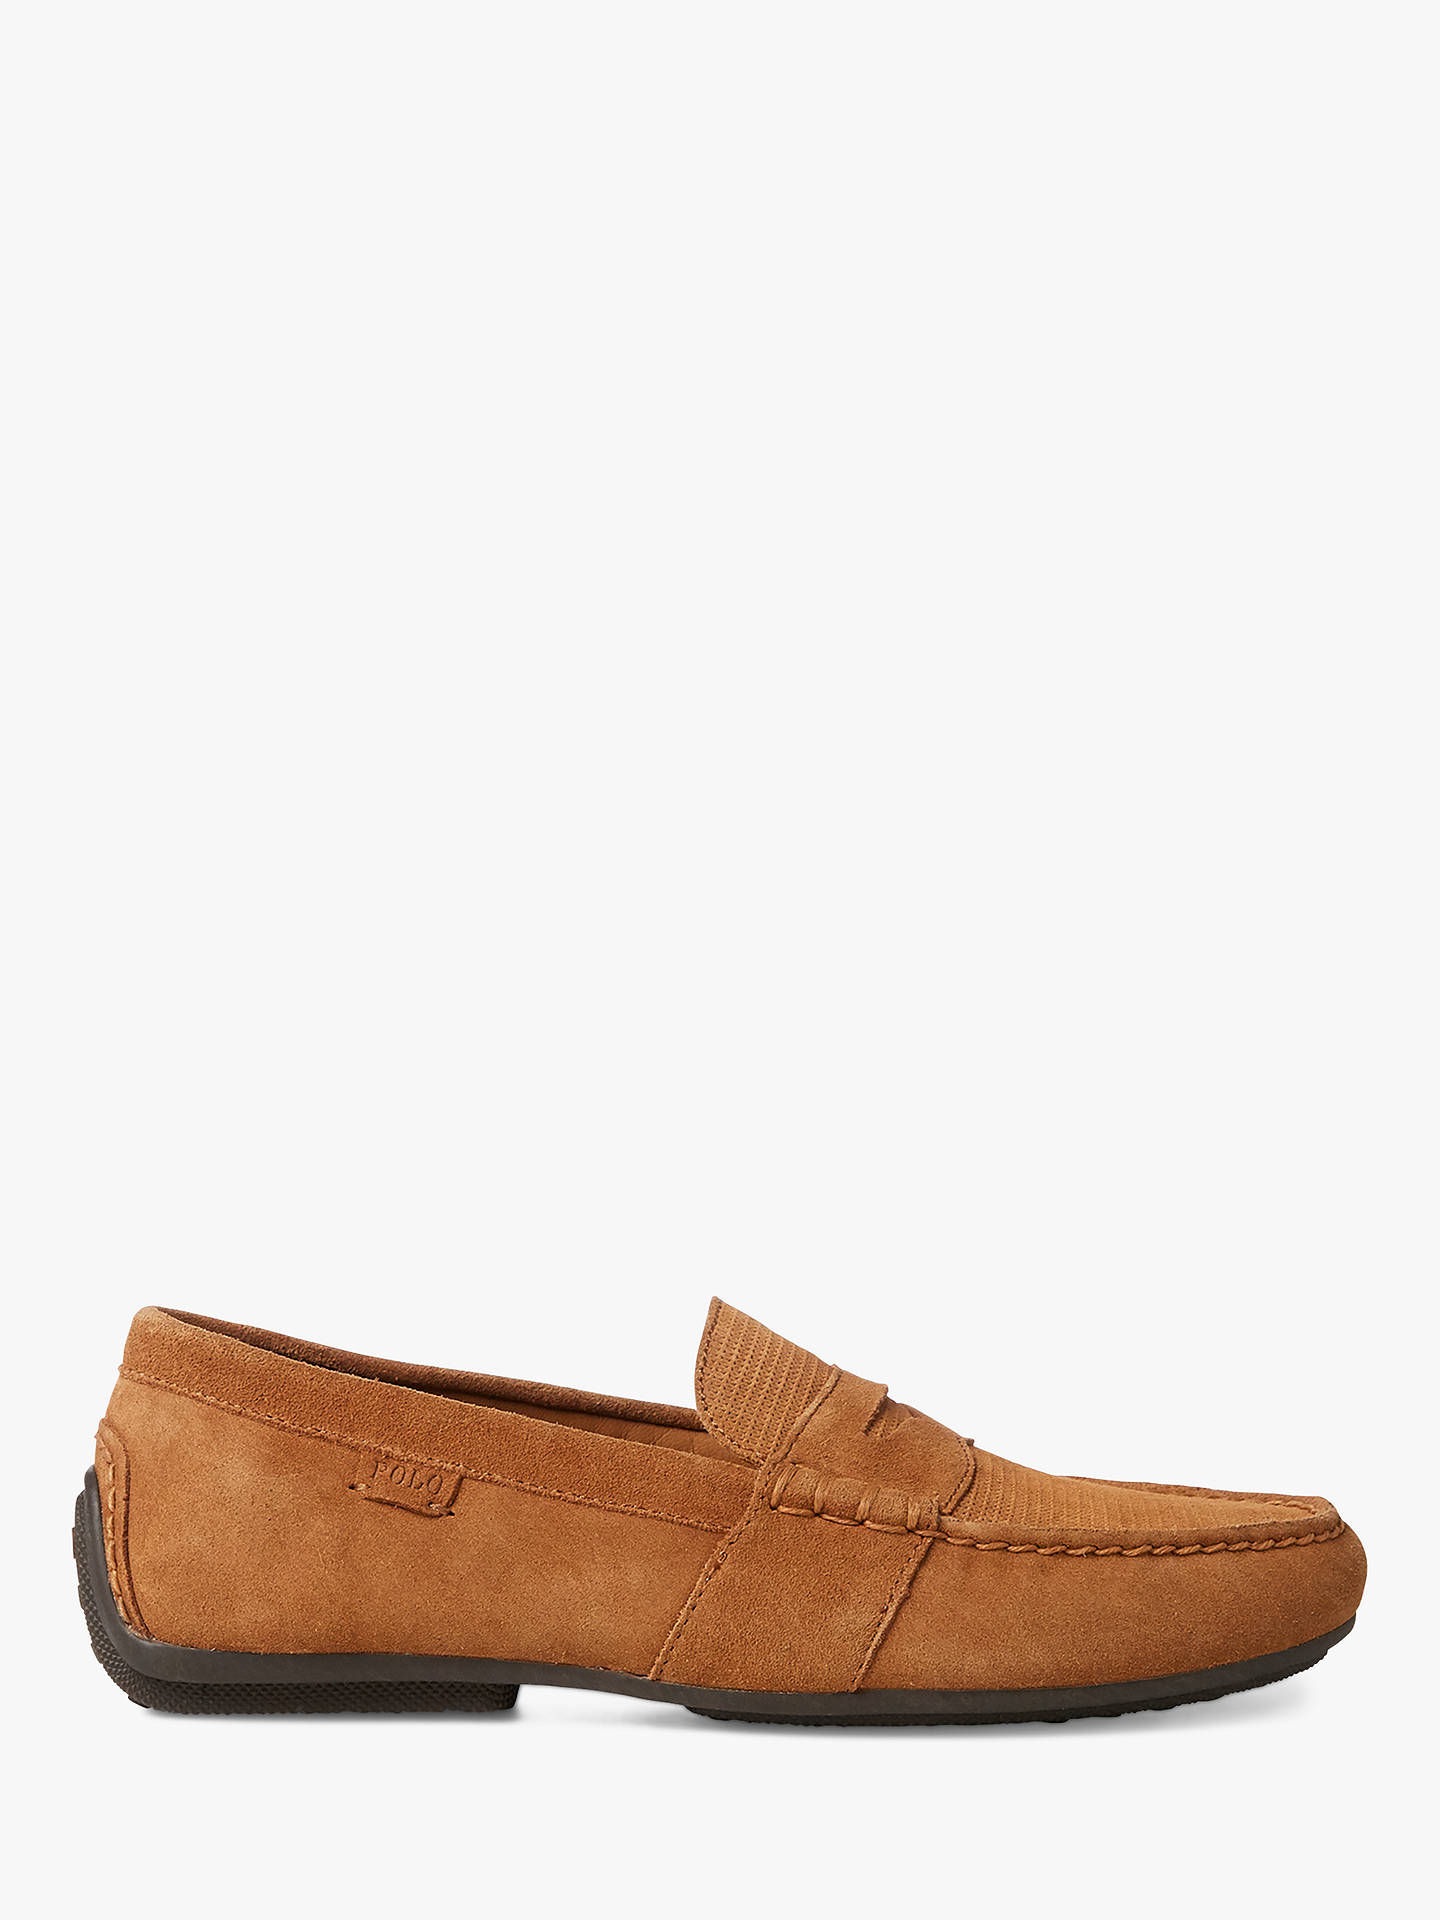 Polo Ralph Lauren Reynold Suede Driving Shoes, New Snuff at John Lewis ...